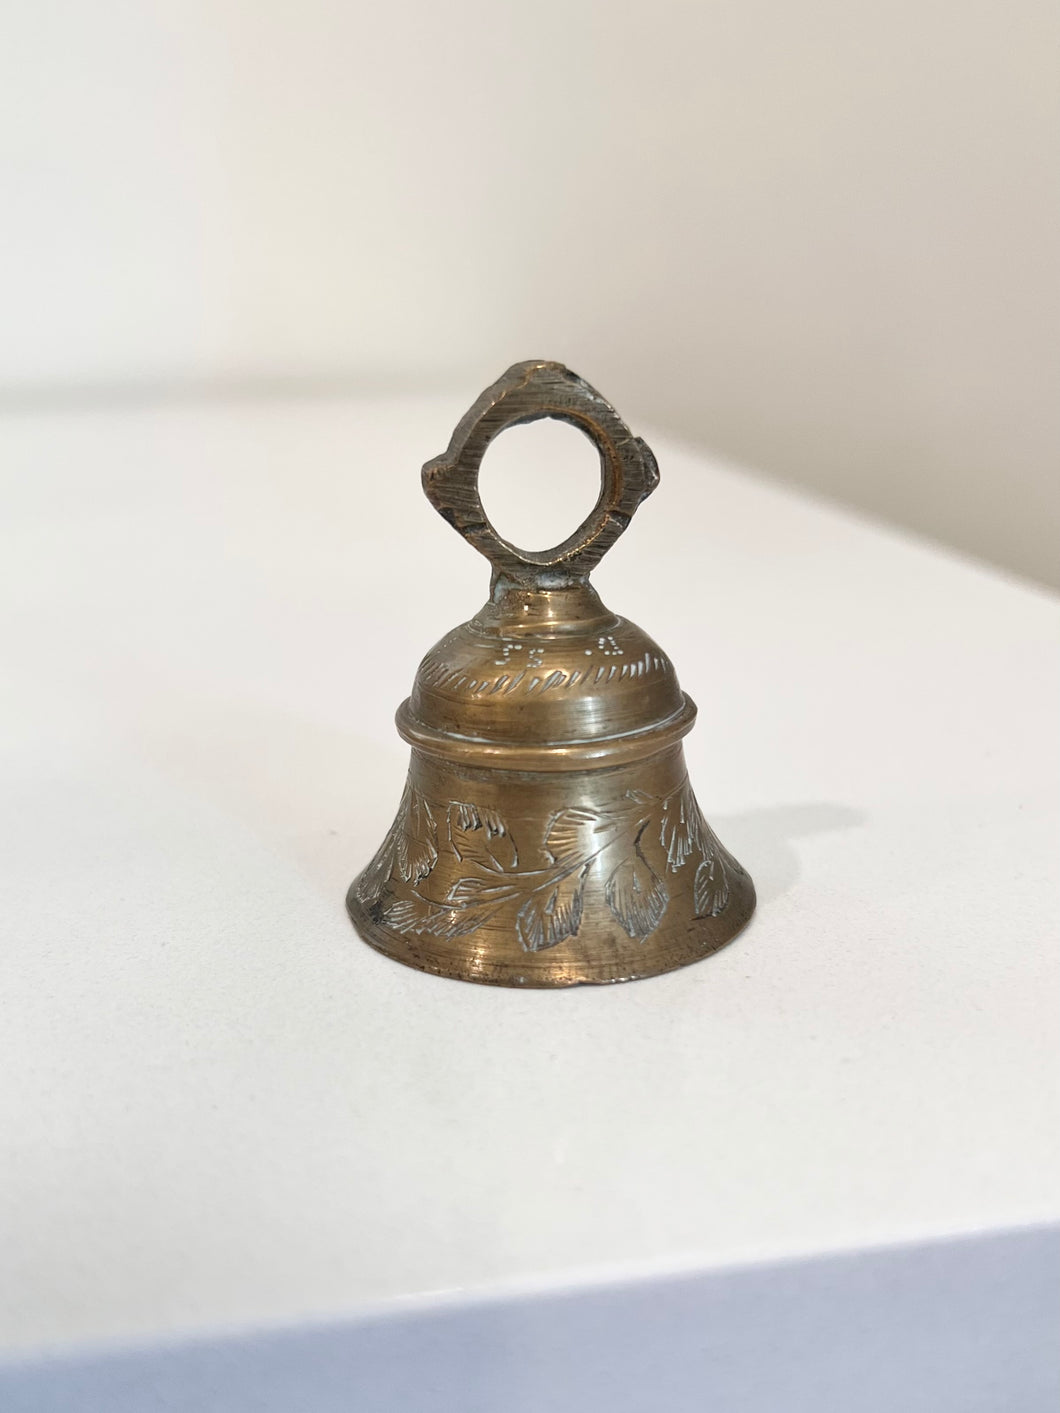 Mini etched brass bell